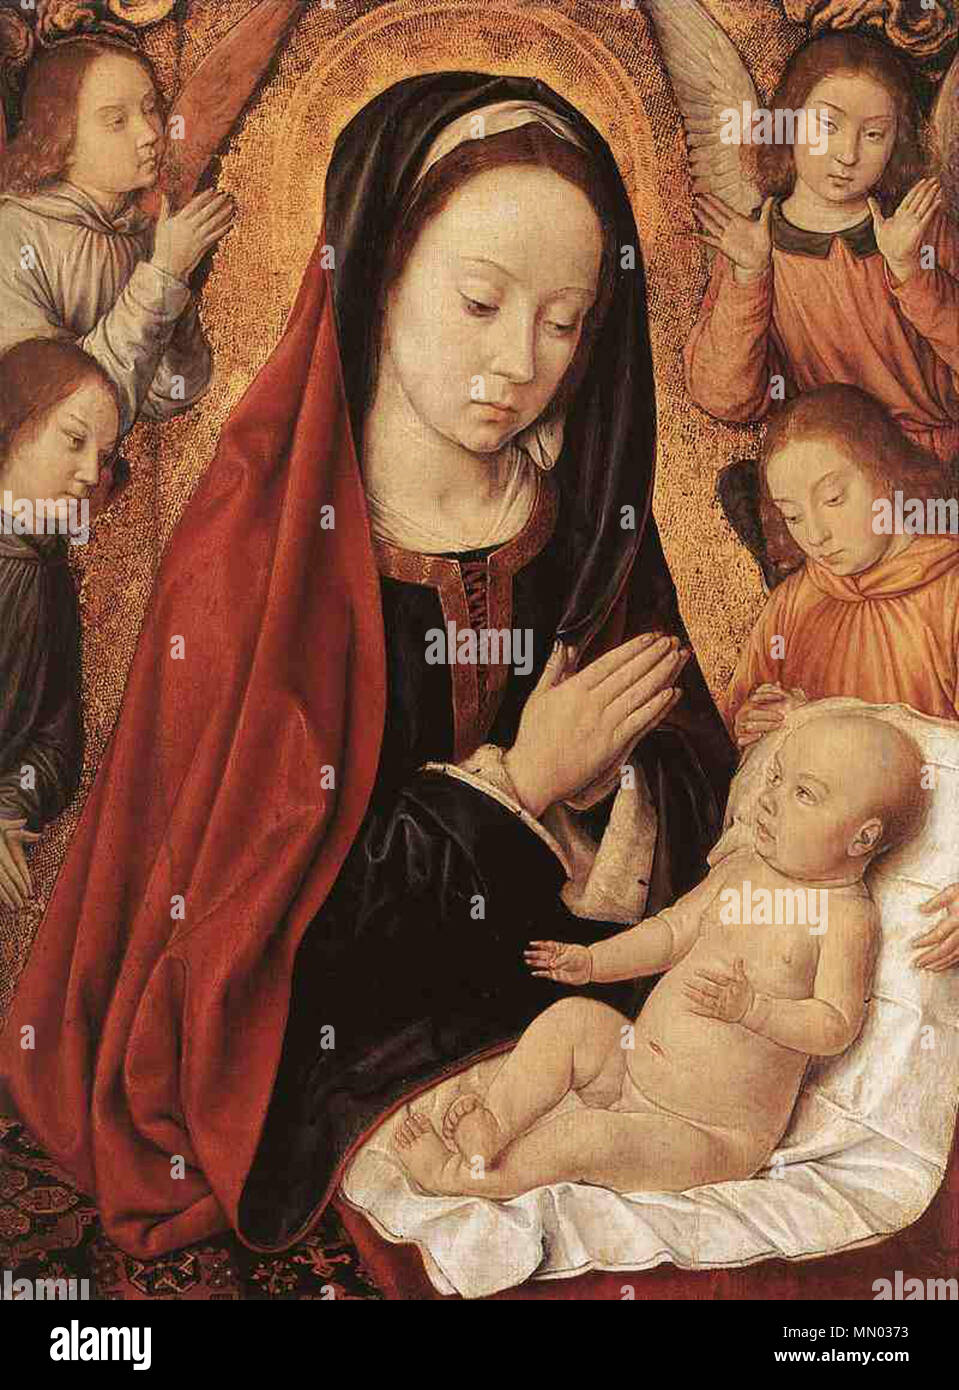 . English: Madonna and Child Adored by Angels Oak, 38,5 x 29,5 cm Mus้es Royaux des Beaux-Arts, Brussels  . circa 1490.   Jean Hey  (fl. circa 1480–1500)    Alternative names Jean Hay, Jean Hey, Jehan de Paris, Master of Moulins, Master of the Bourbons, Jean Prévost (?)  Description French painter and illuminator  Date of birth/death 15th century after 1505  Work period circa 1480-1500  Work location Northern France (circa 1480-1500), Lyon (1471-1497) (?)  Authority control  : Q1268739 VIAF:?65306105 ISNI:?0000 0000 8251 6385 ULAN:?500145637 LCCN:?n80081639 NLA:?35902588 WorldCat Hey Maddonna  Stock Photo